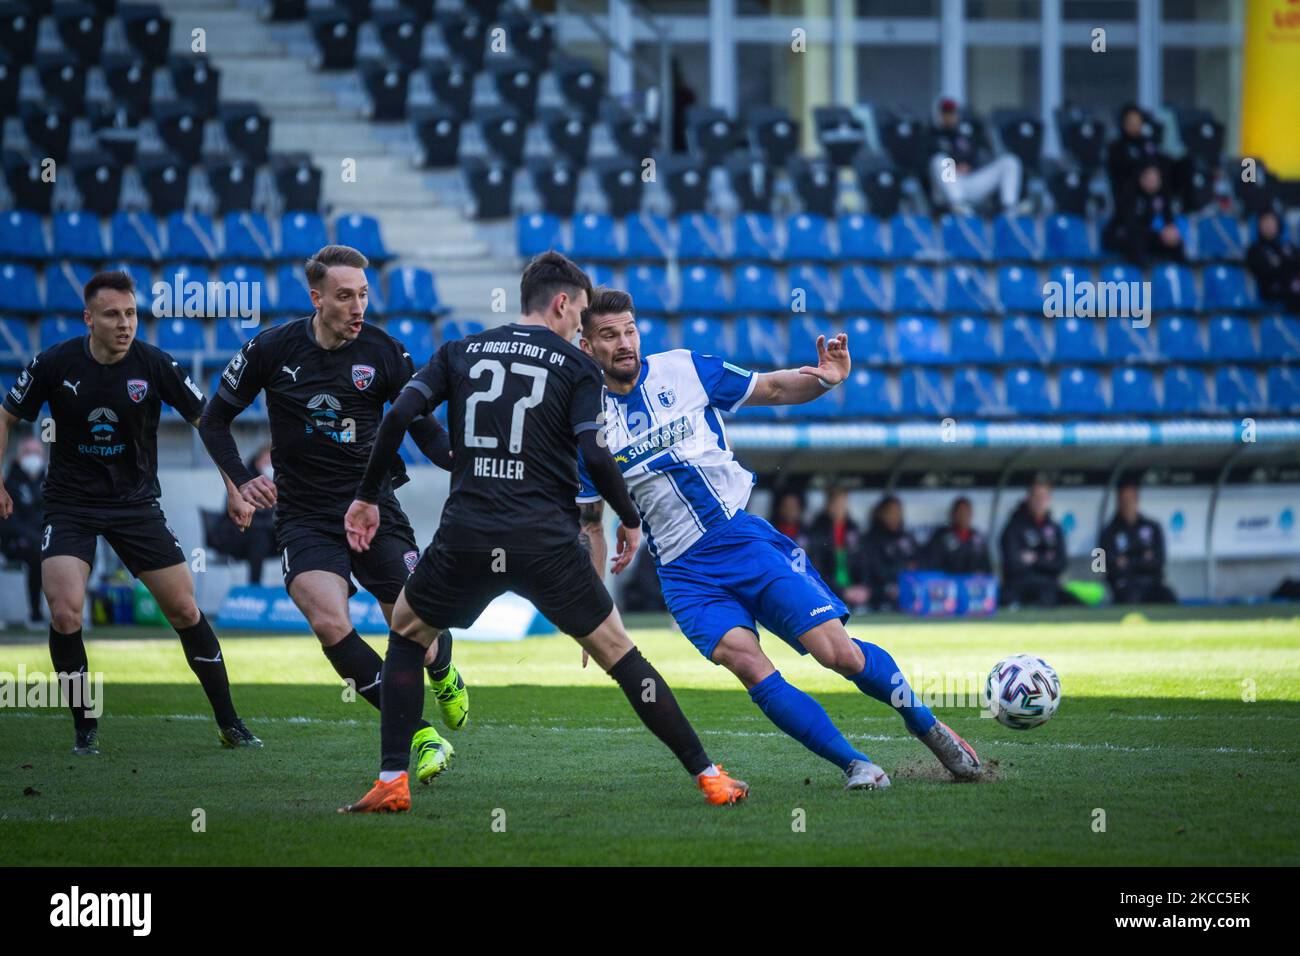 (from left to right) Dominik Franke, Tobias Schroeck and Thomas Keller of Ingolstadt and Kai Bruenker of Magdeburg vie for the ball during the 3. Liga match between 1. FC Magdeburg and FC Ingolstadt 04 at MDCC-Arena on April 03, 2021 in Magdeburg, Germany. (Photo by Peter Niedung/NurPhoto) Stock Photo